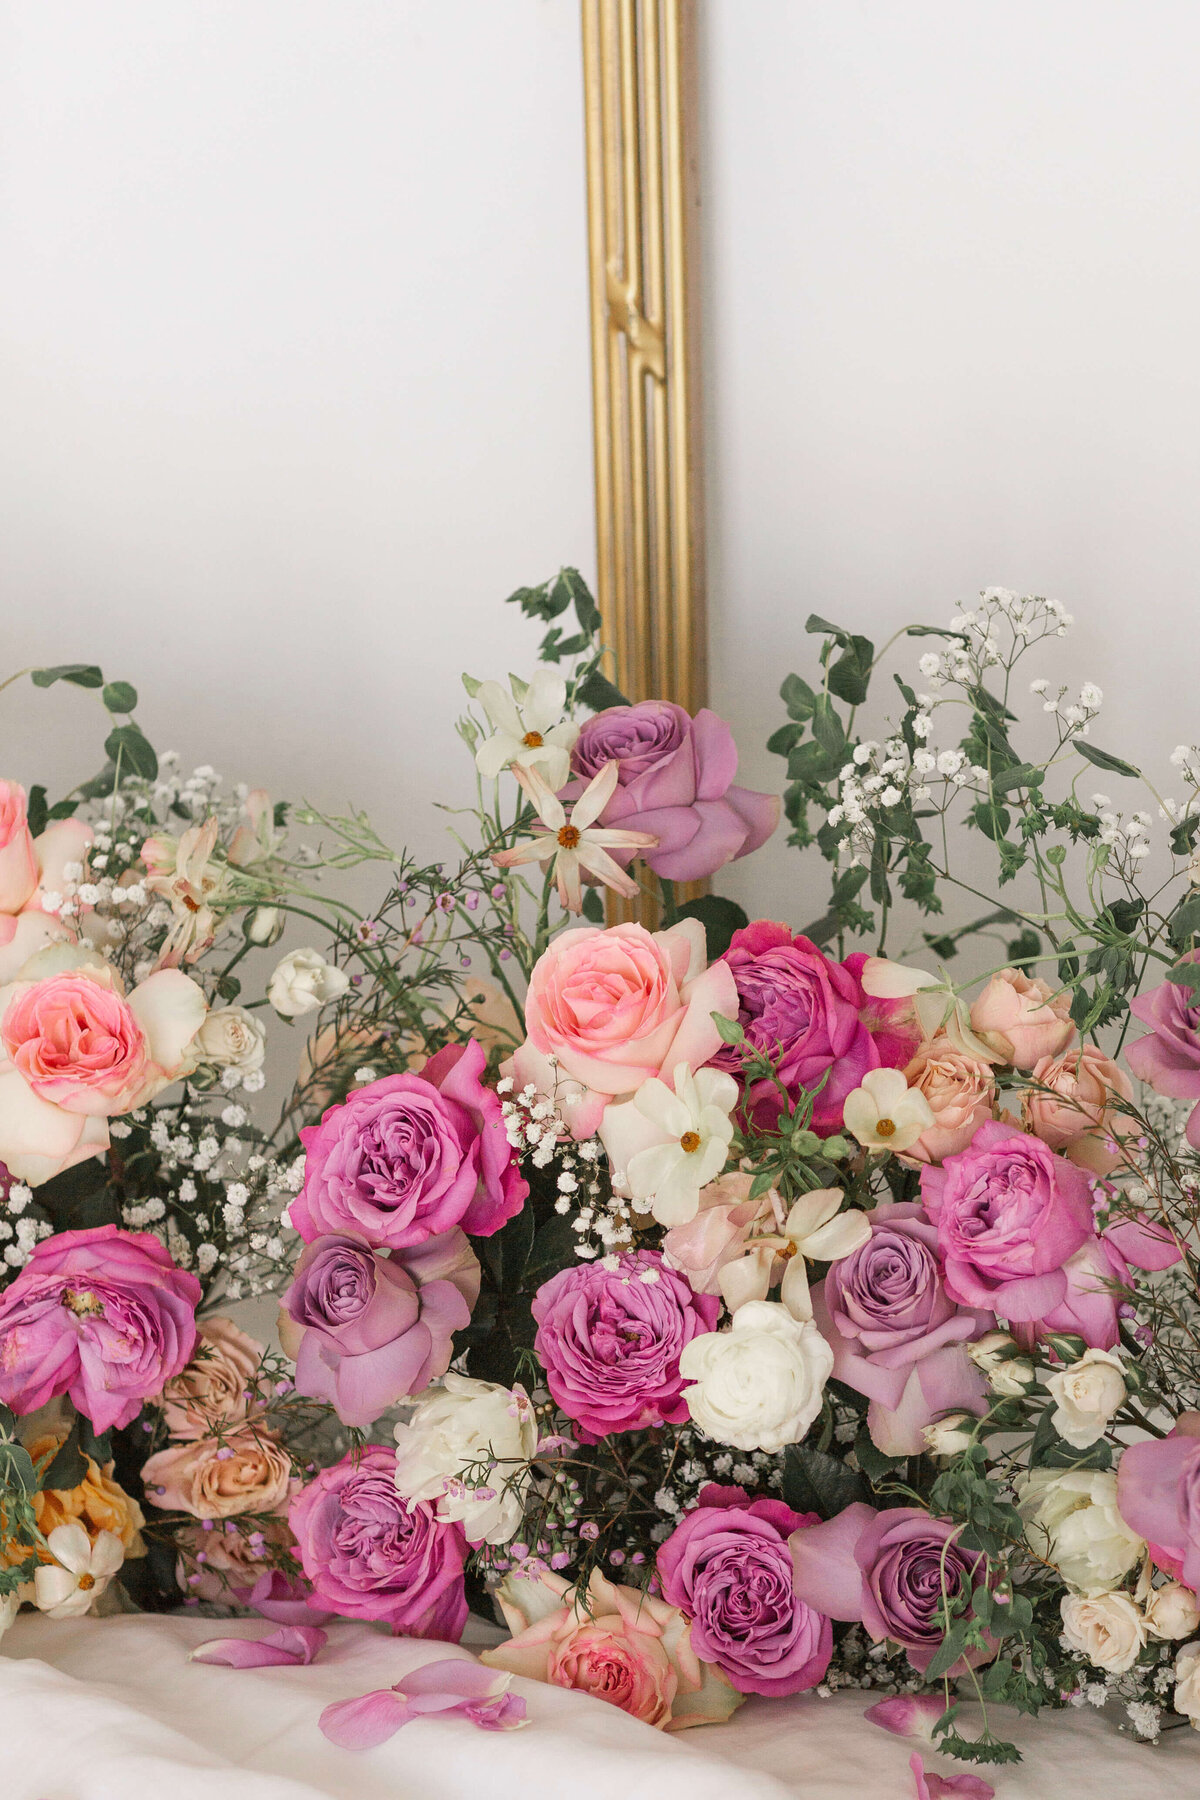 blush, pink and purple roses in floor floral display